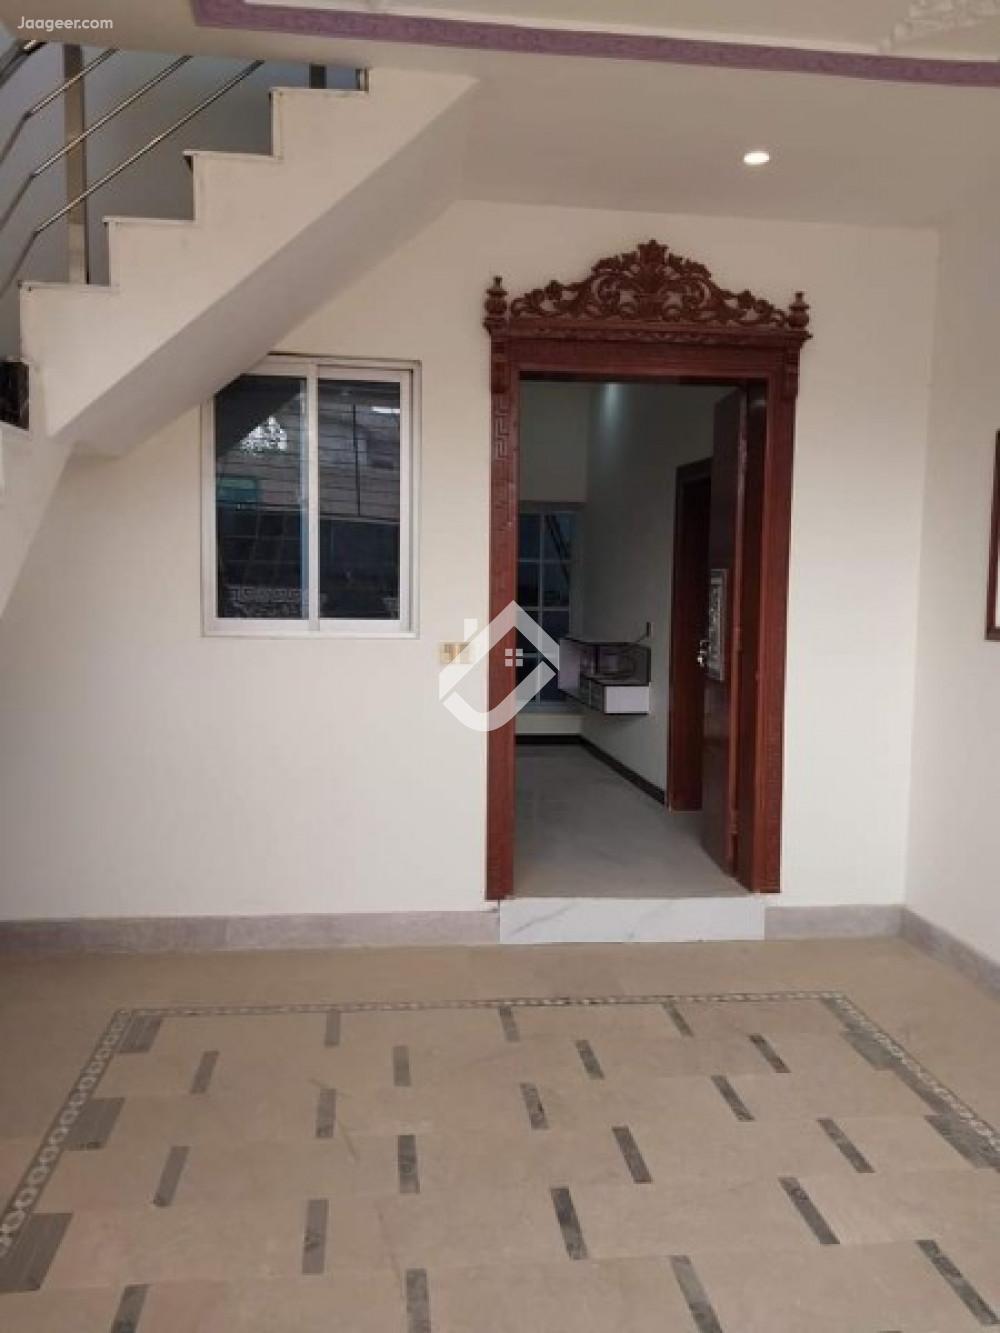 View  4 Marla House For Sale In Peer Muhammad Colony in Peer Muhammad Colony, Sargodha